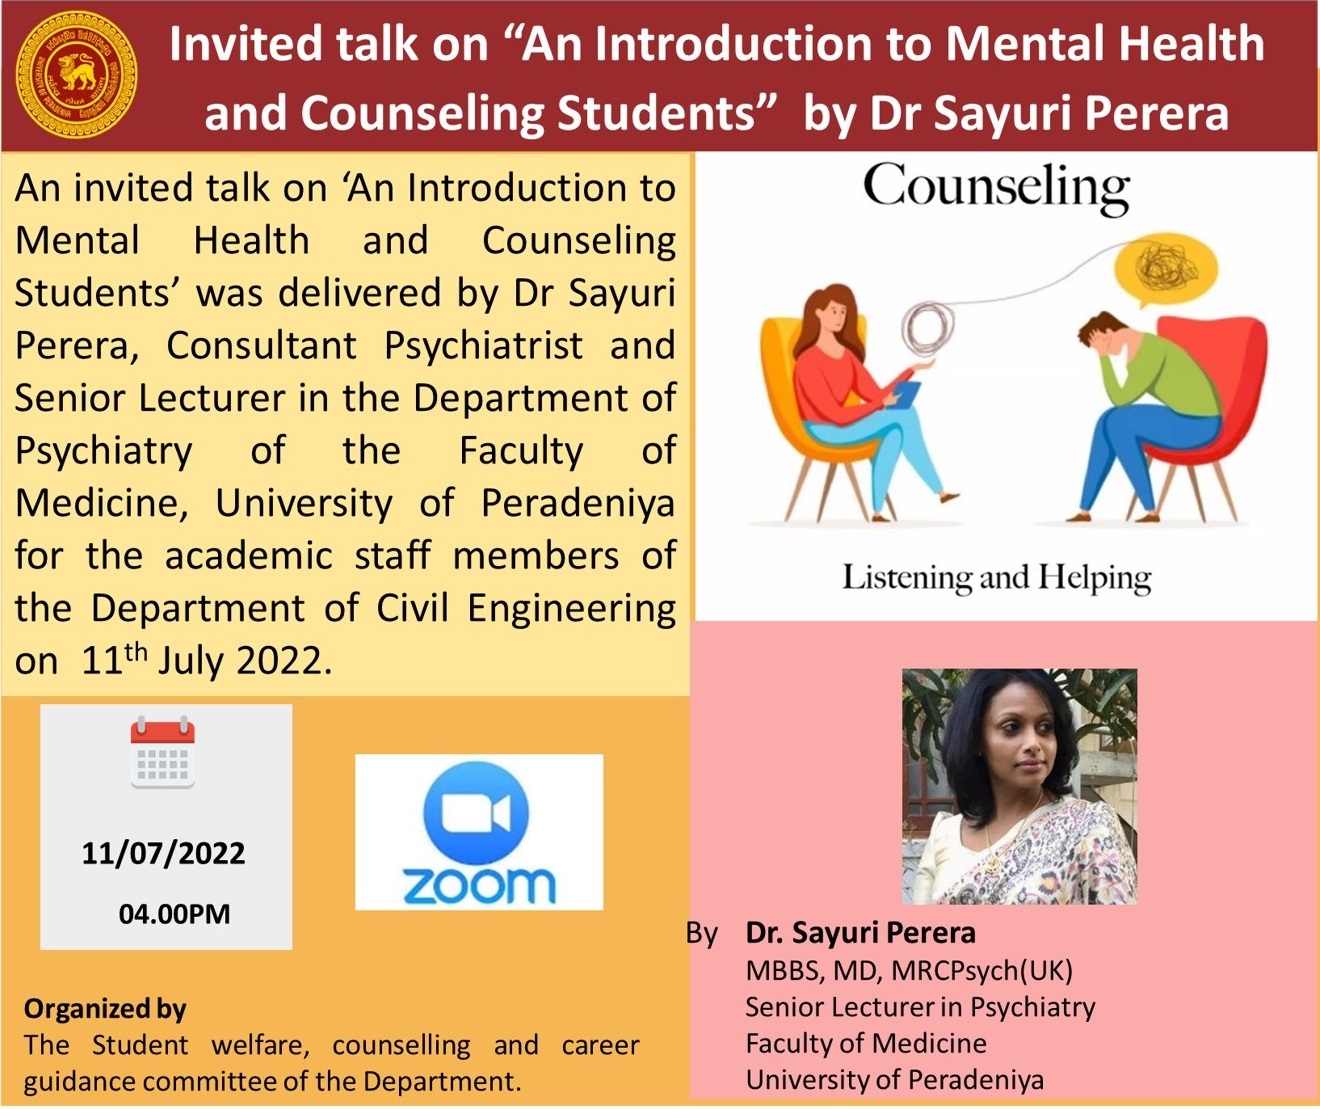 An invited talk on ‘An Introduction to Mental Health and Counseling Students’